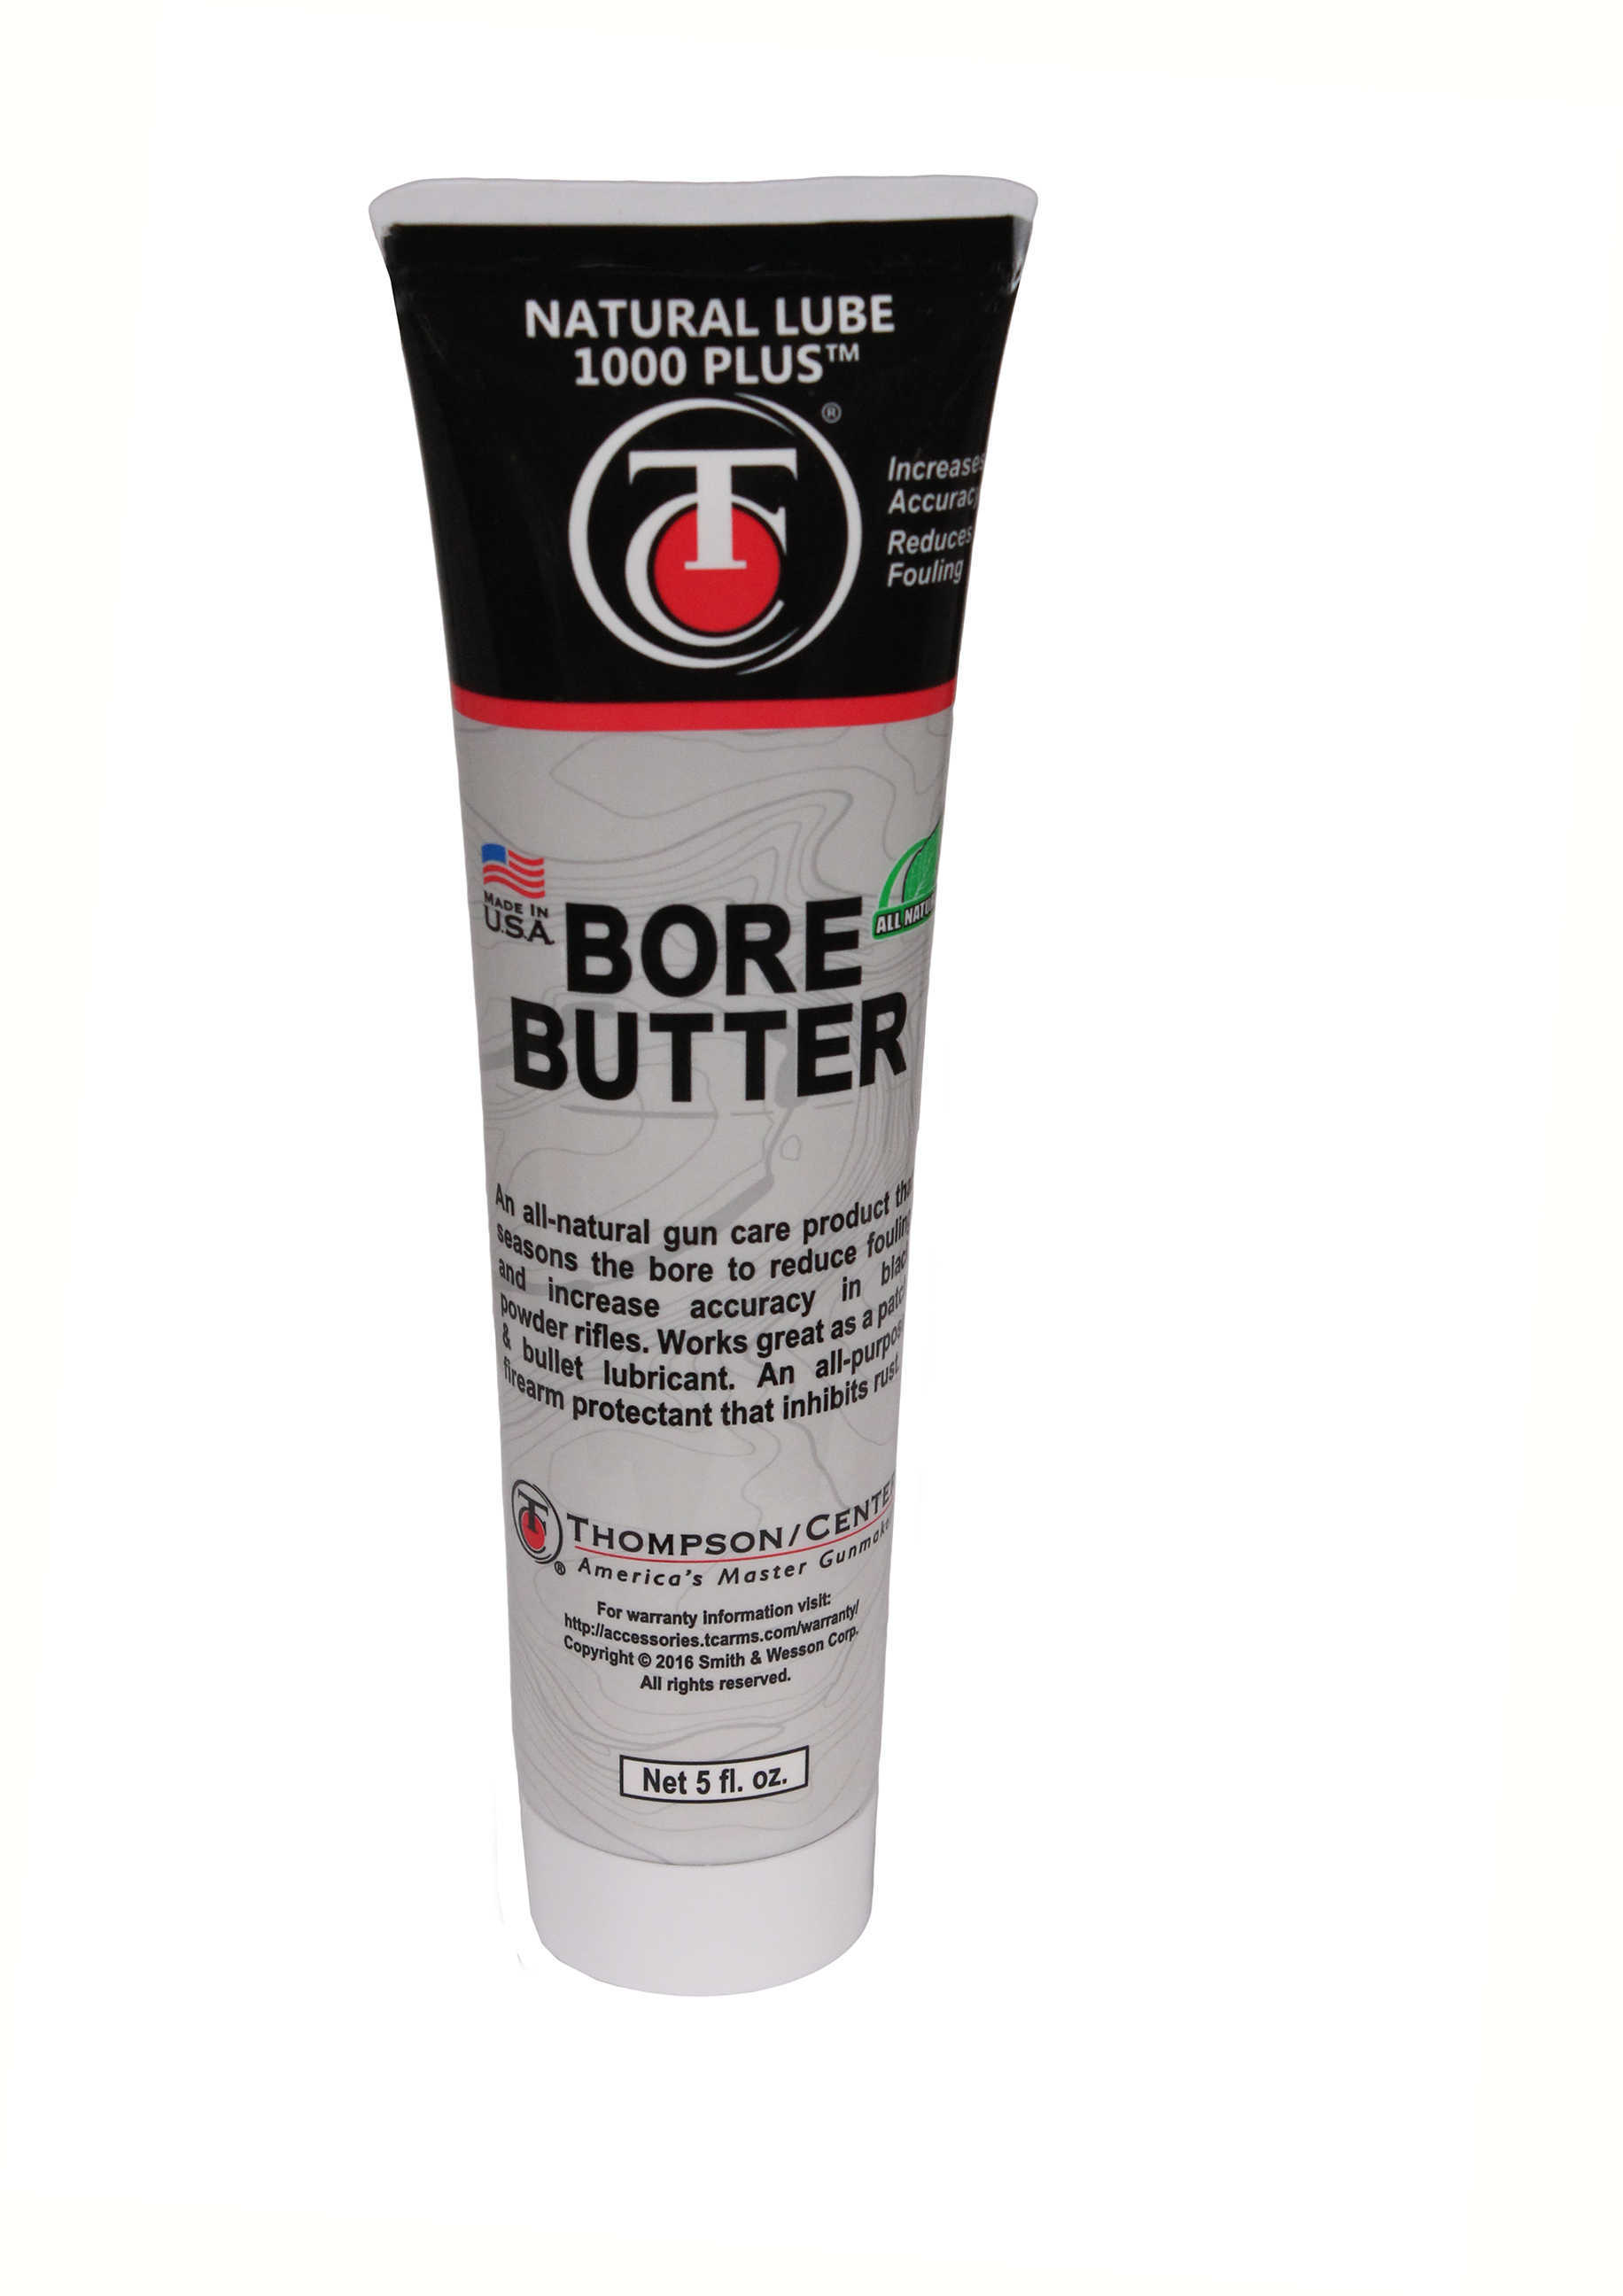 T/C Natural Lube 1000 Plus Bore Butter